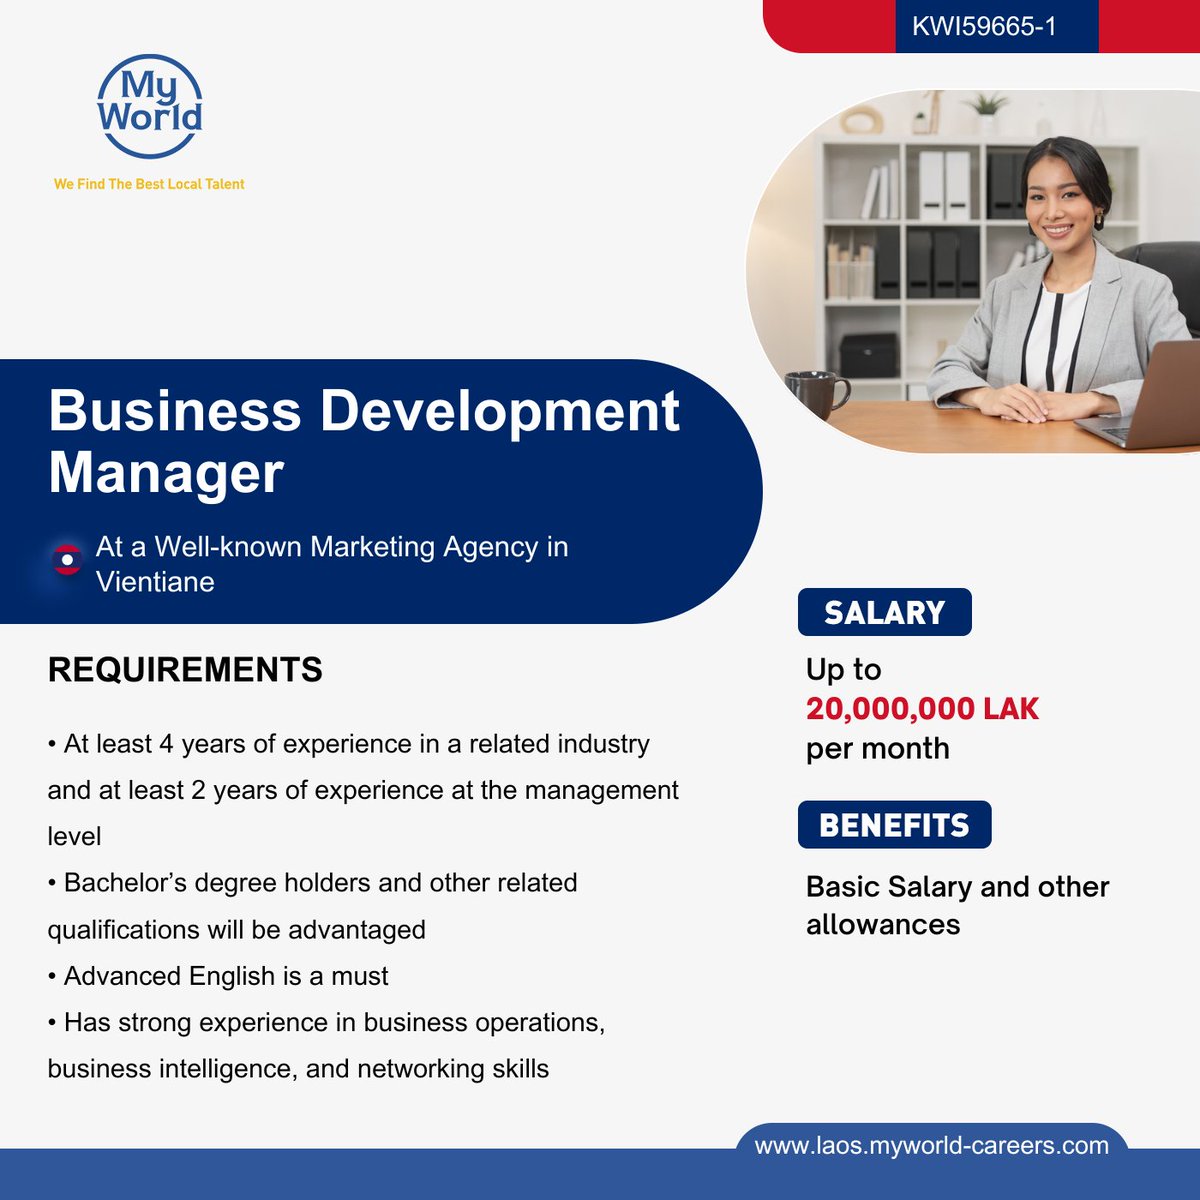 #Hiring in #Laos

Position -​​ ​#BusinessDevelopmentManager at a Well-known Marketing Agency in Vientiane
Salary - Up to 20,000,000 LAK per month
#Job Link - tinyurl.com/2exe5ayu
Email - support@myworld-careers.com

#vacancies #jobs #JobOpportunity